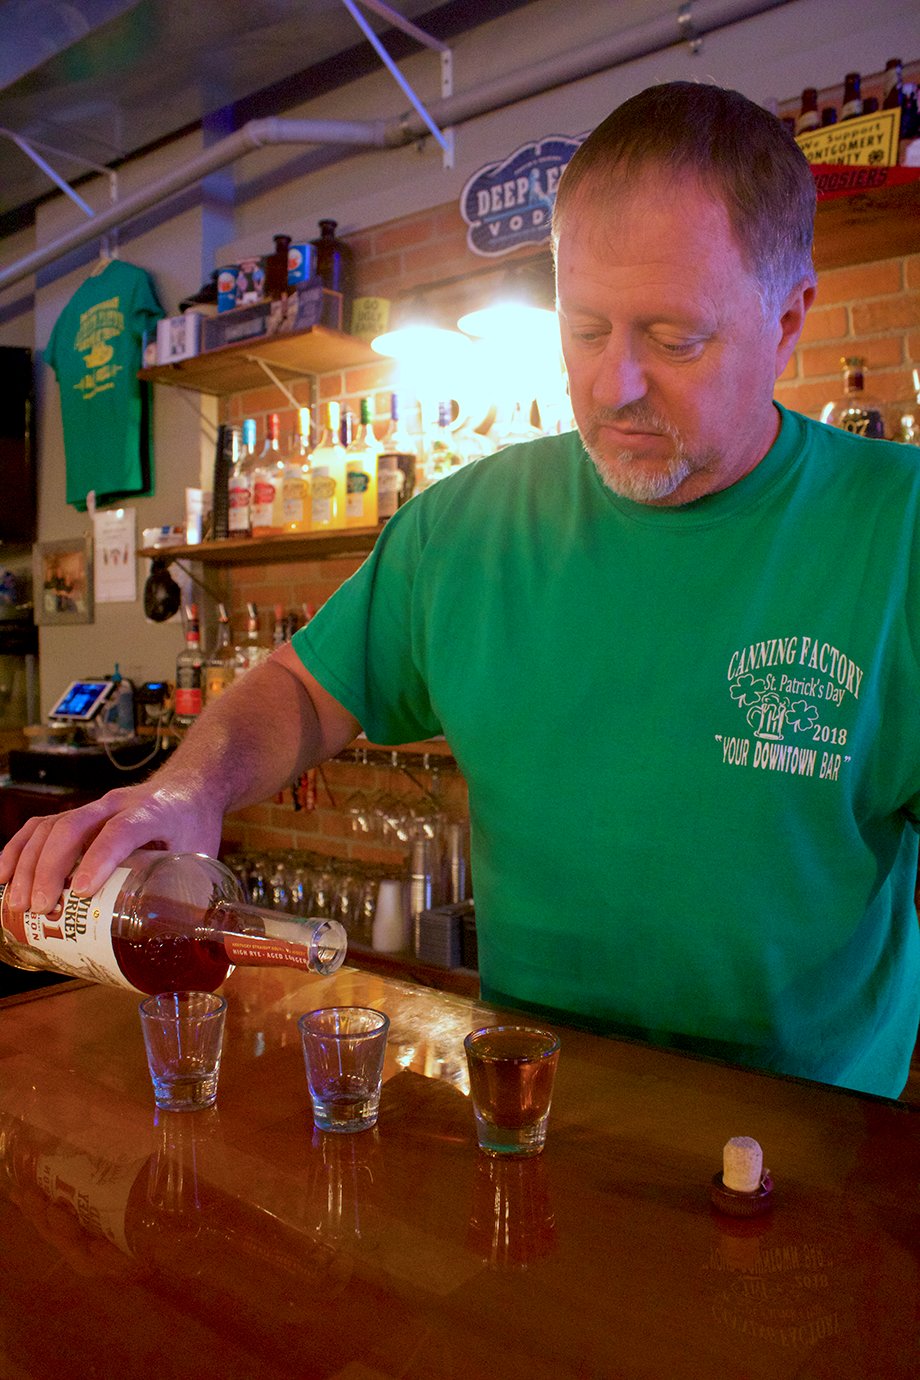 Brett Cating, owner of The Canning Factory Bar & Grill in Ladoga, practices his pouring technique Wednesday ahead of a speakeasy transformation set to take place Friday and Saturday.